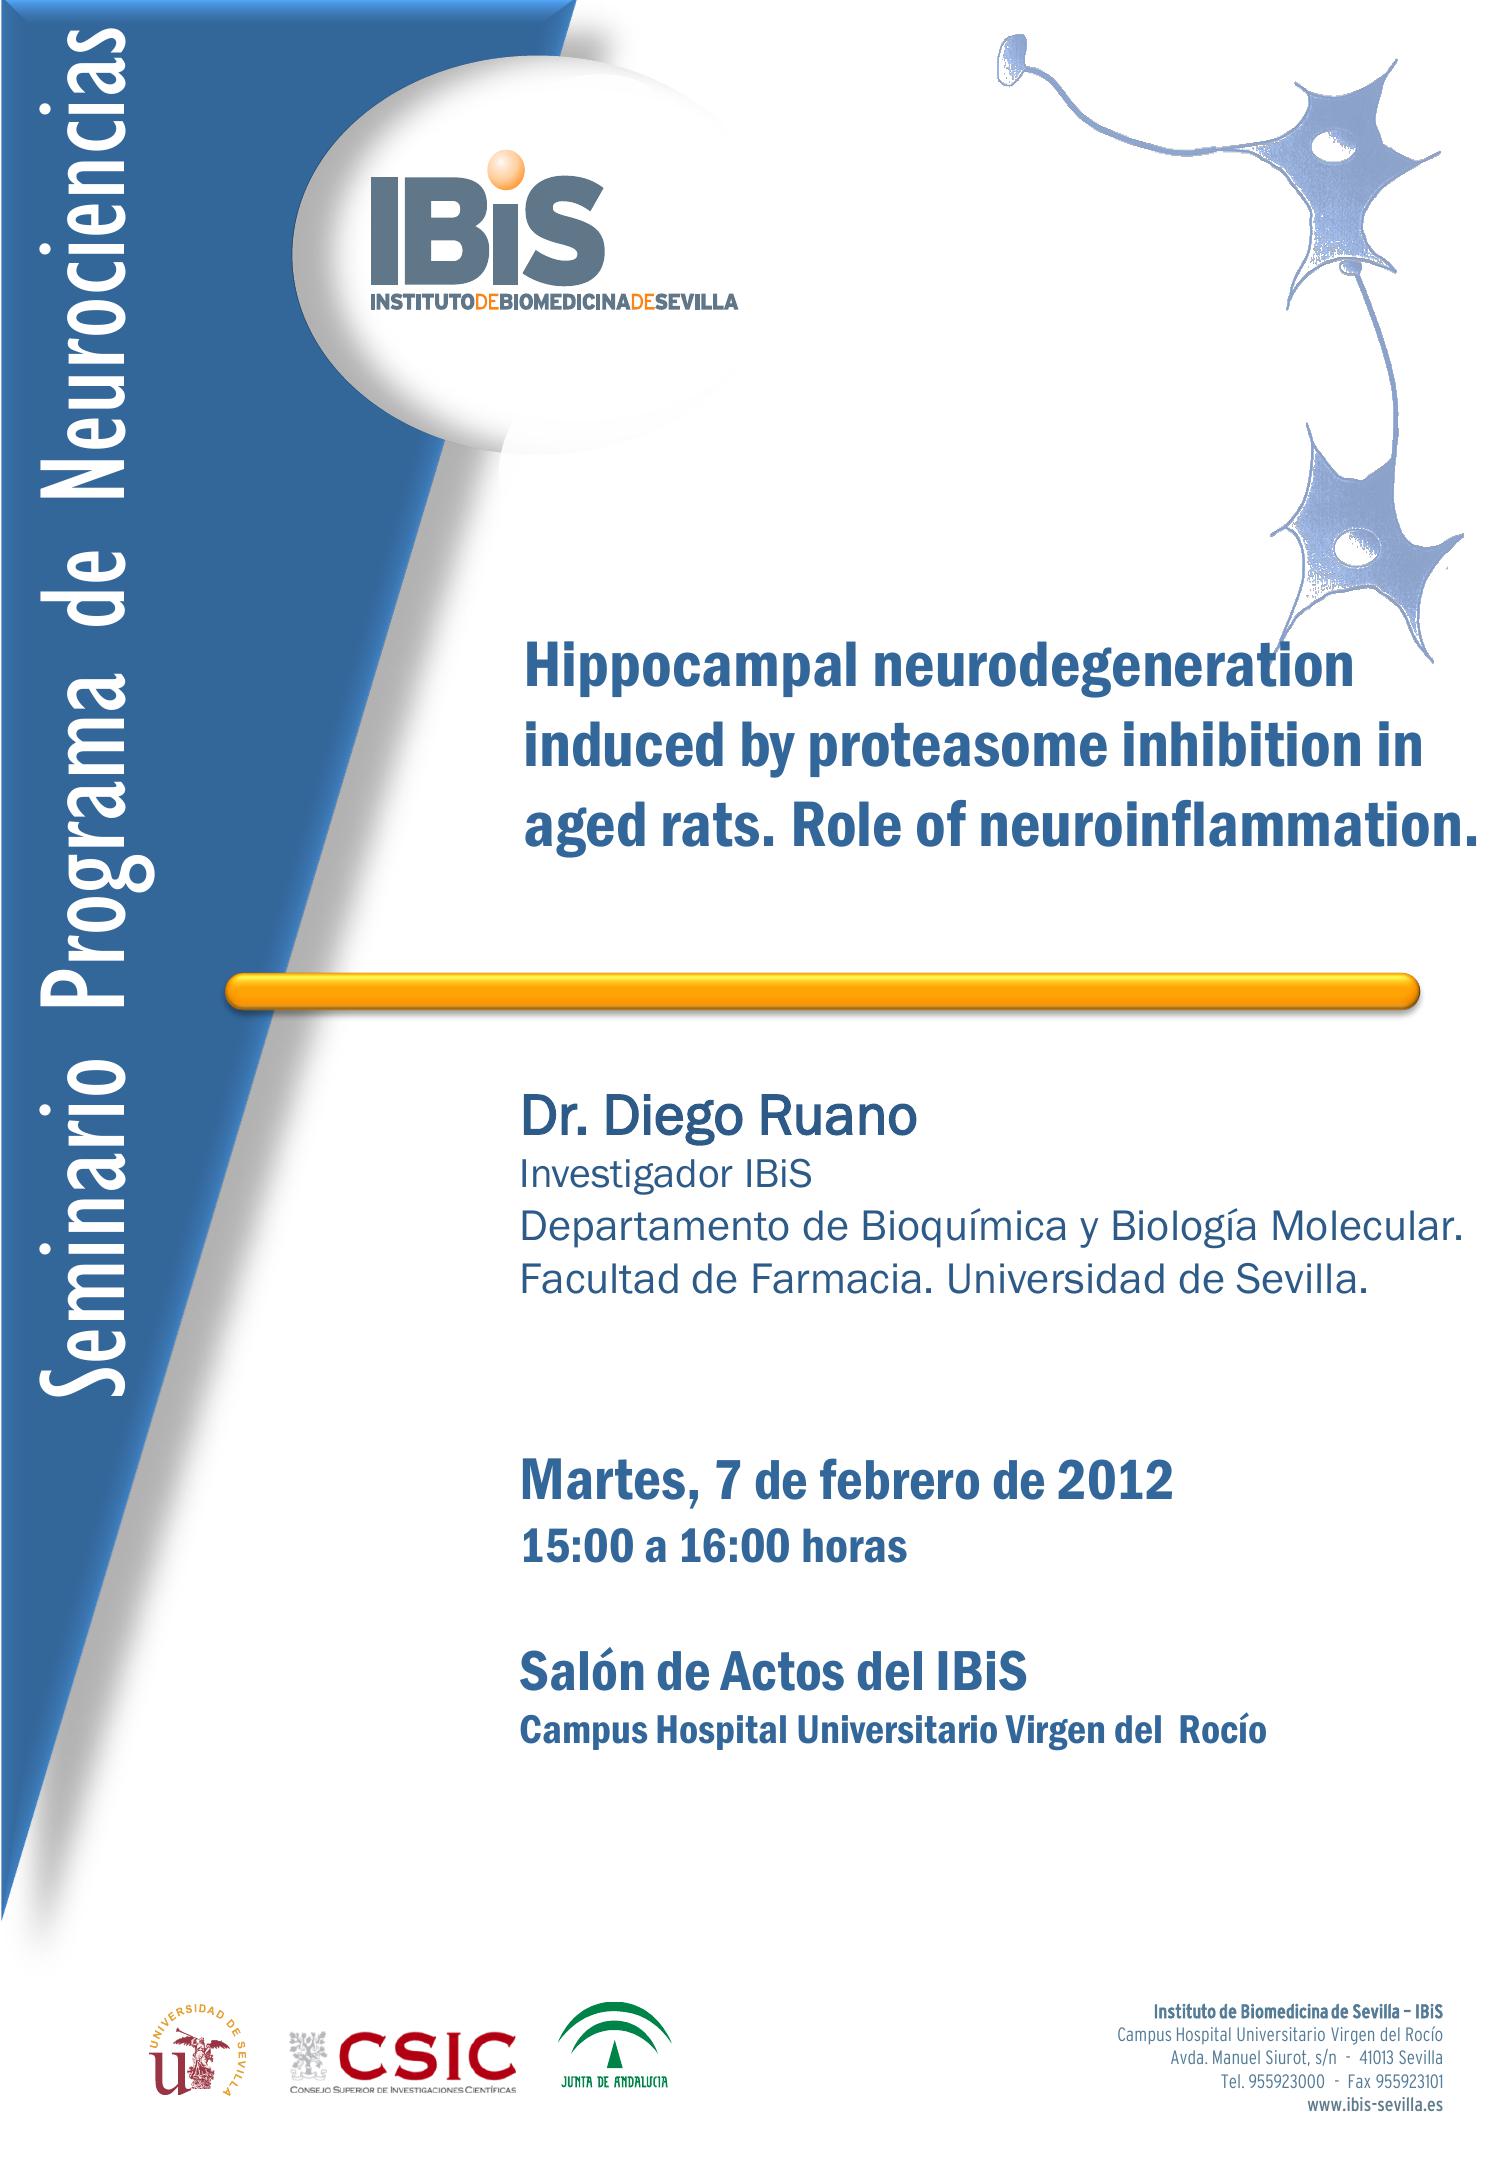 Poster: Hippocampal neurodegeneration induced by proteasome inhibition in aged rats. Role of neuroinflammation.